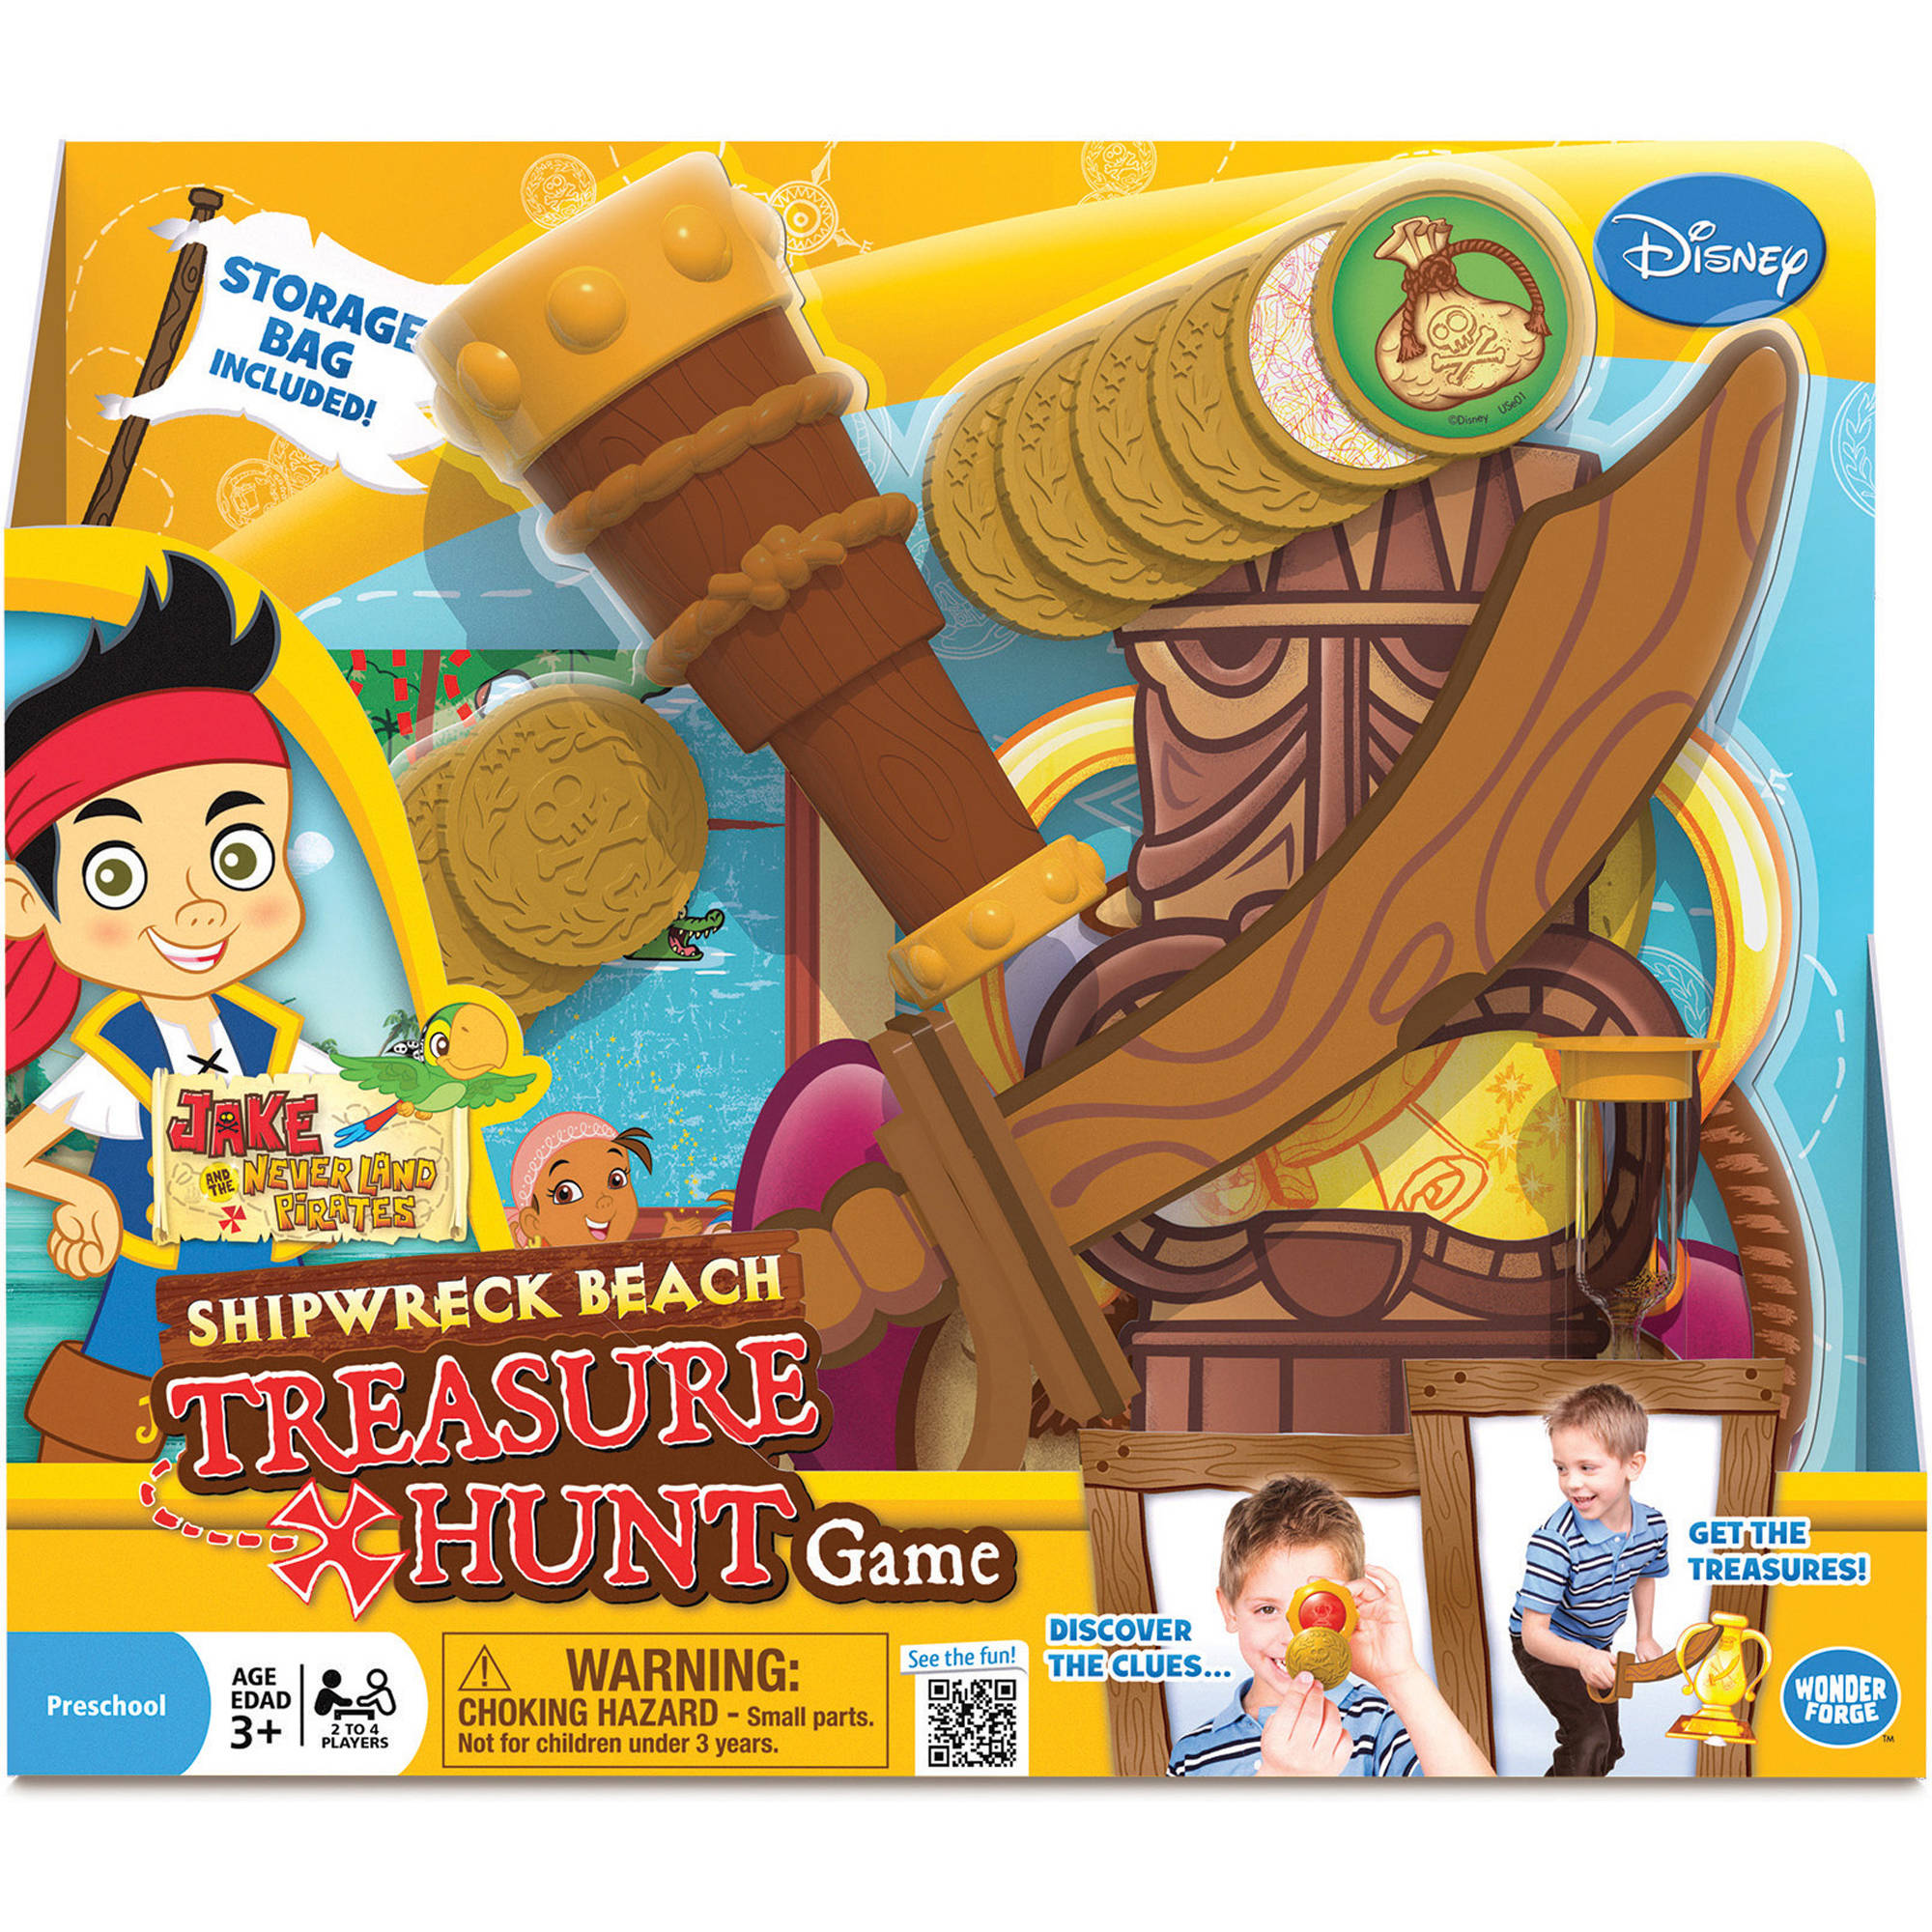 Disney Jake and the Never Land Pirates Shipwreck Beach Treasure Hunt Role Play Game - image 1 of 5